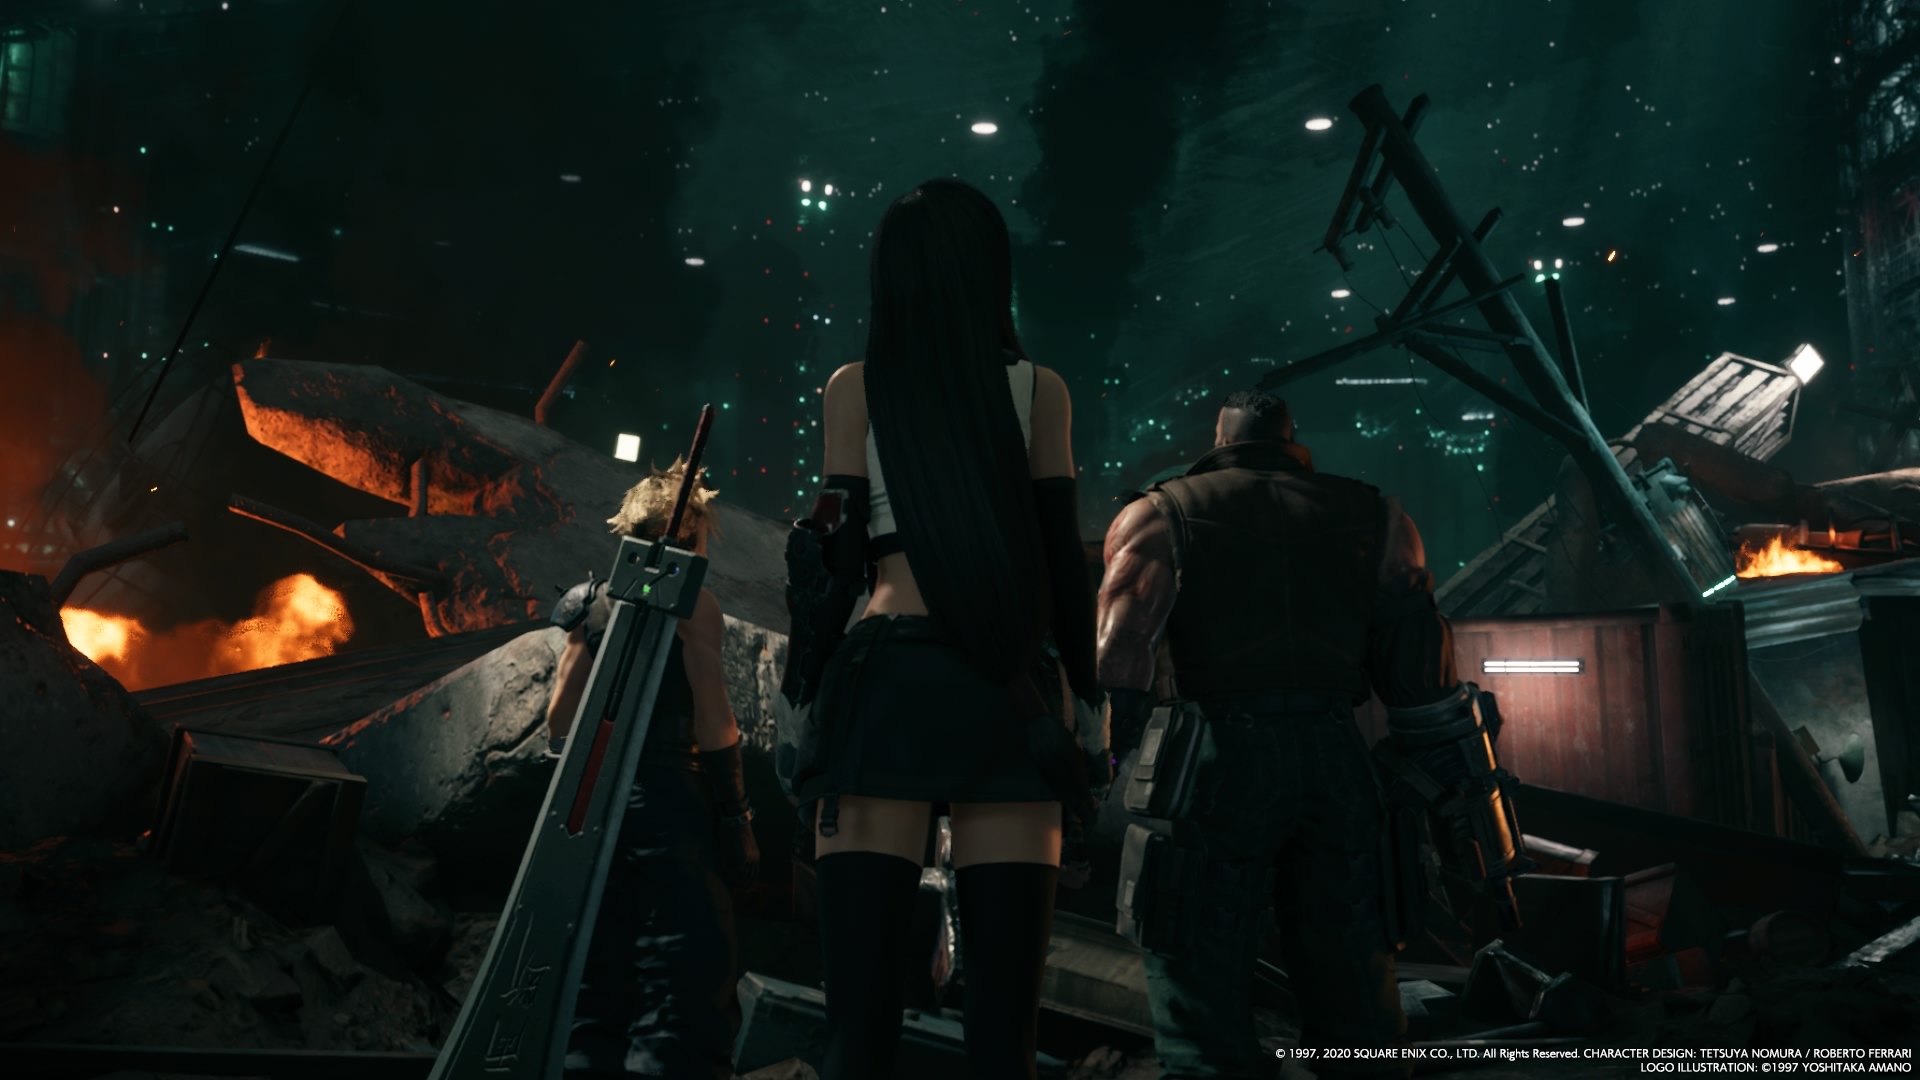 Final Fantasy VII Remake Sephiroth Diminishes His Power and Mystery